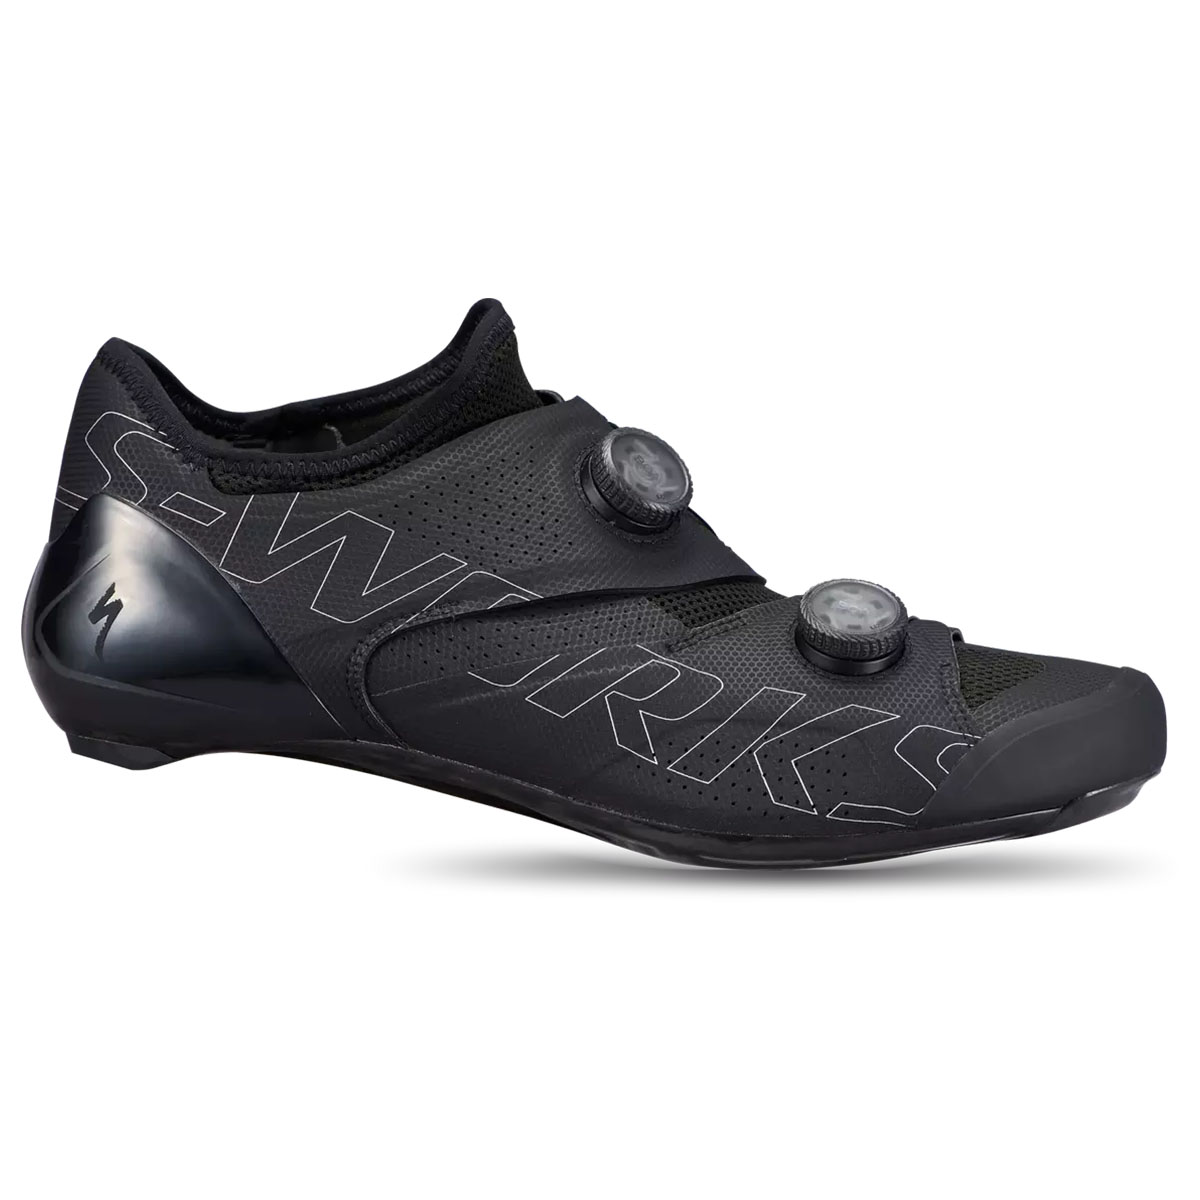 Chaussures Specialized S-Works Ares